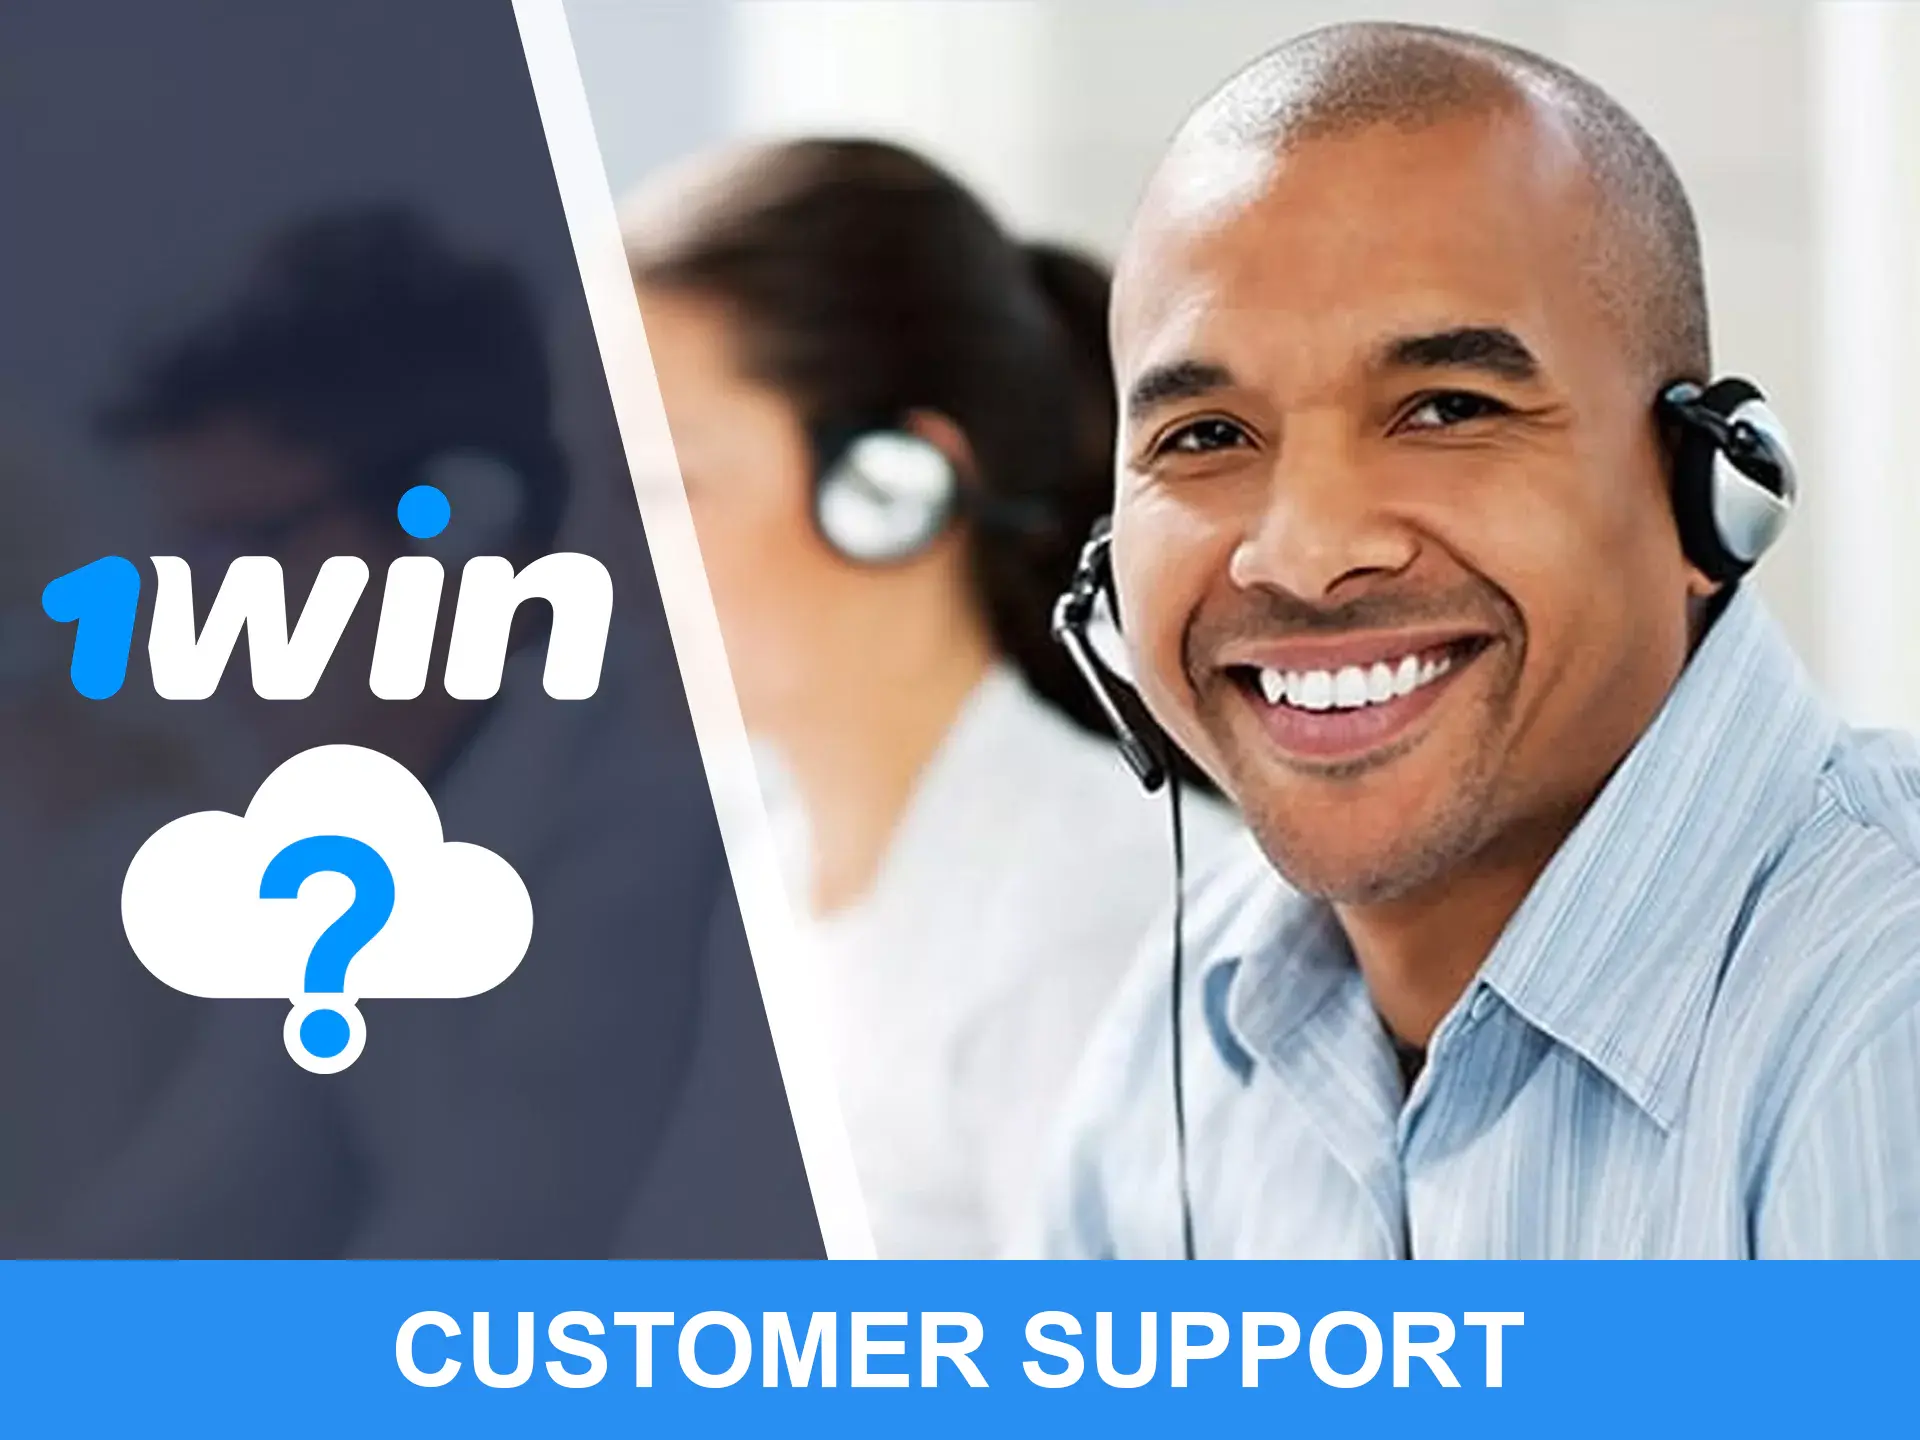 1Win customer support services - helpful information for users.